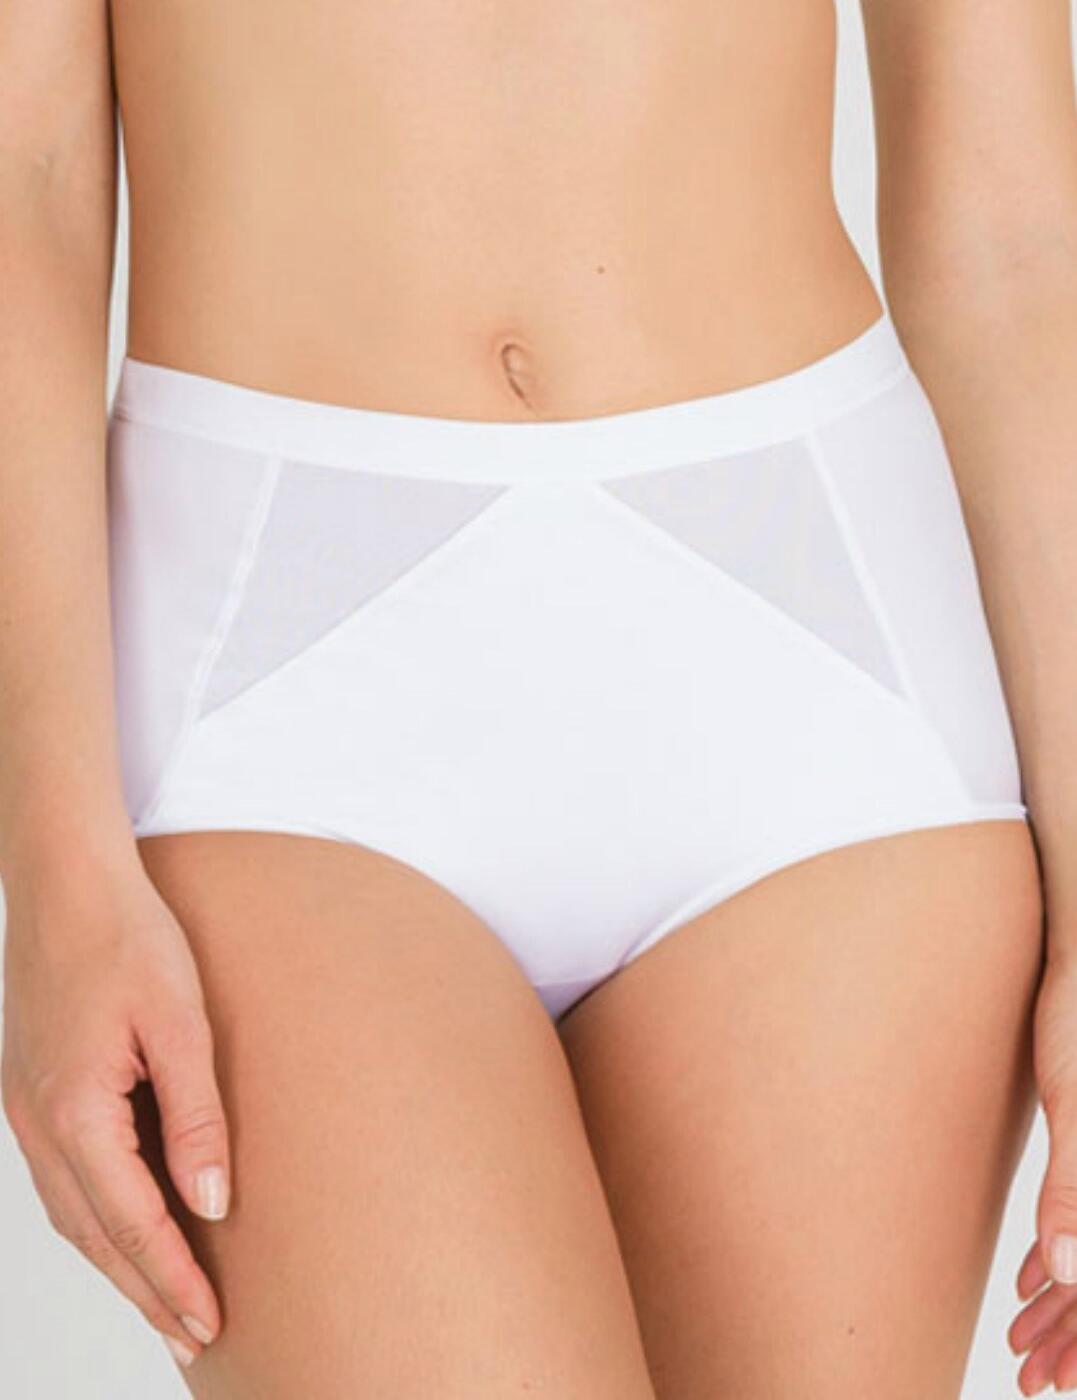 Playtex Perfect Silhouette Invisible Shaping Maxi Brief White